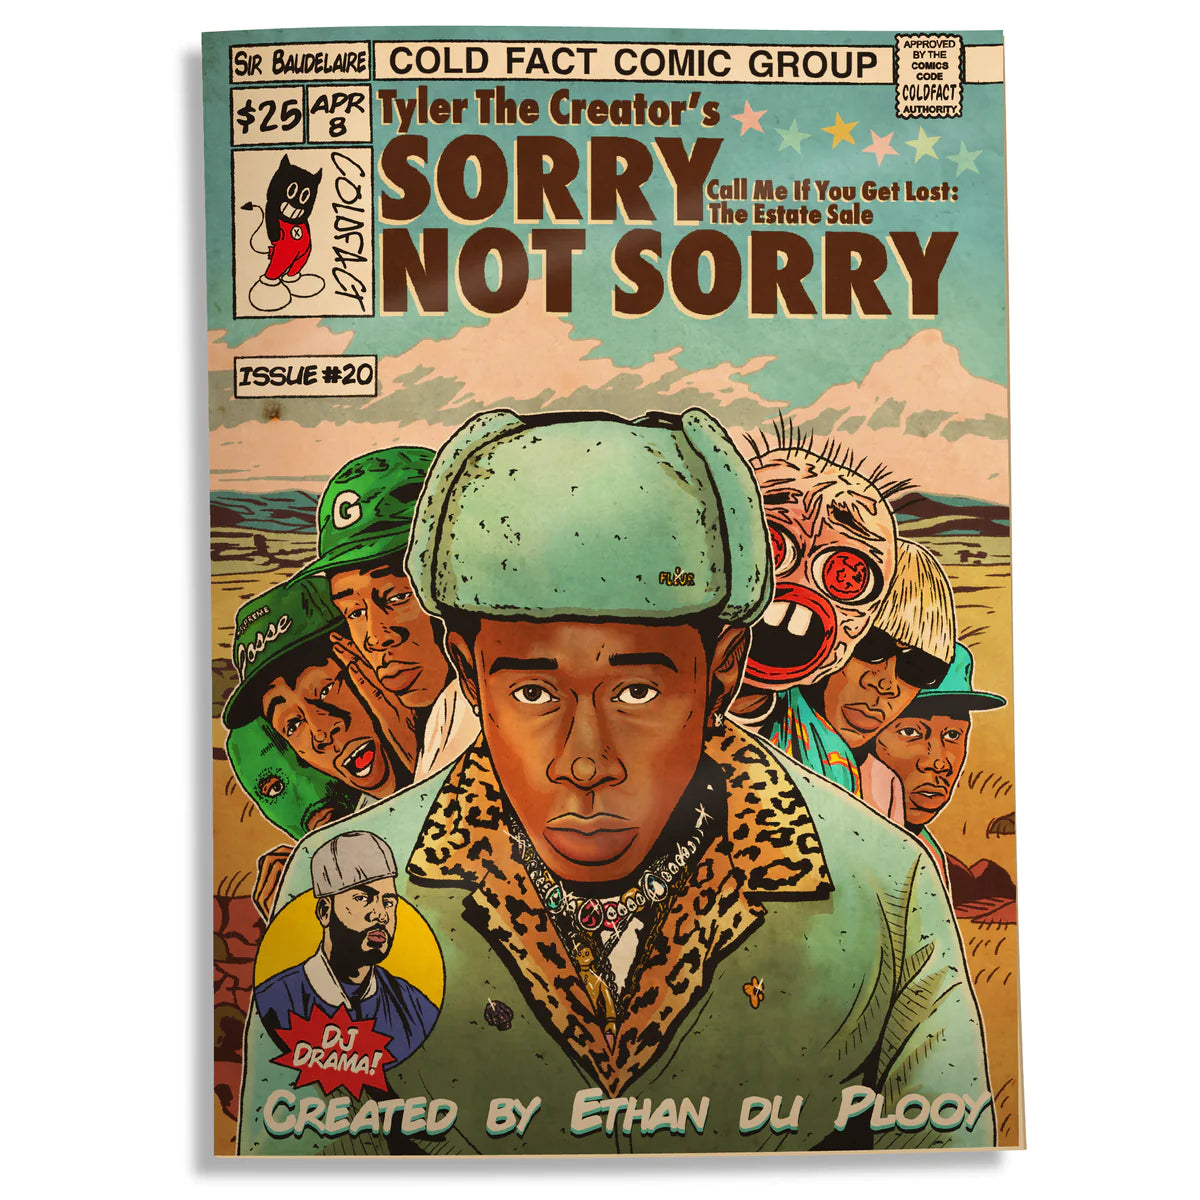 Tyler The Creator Unofficial Comic - Sorry Not Sorry – COLDFACT